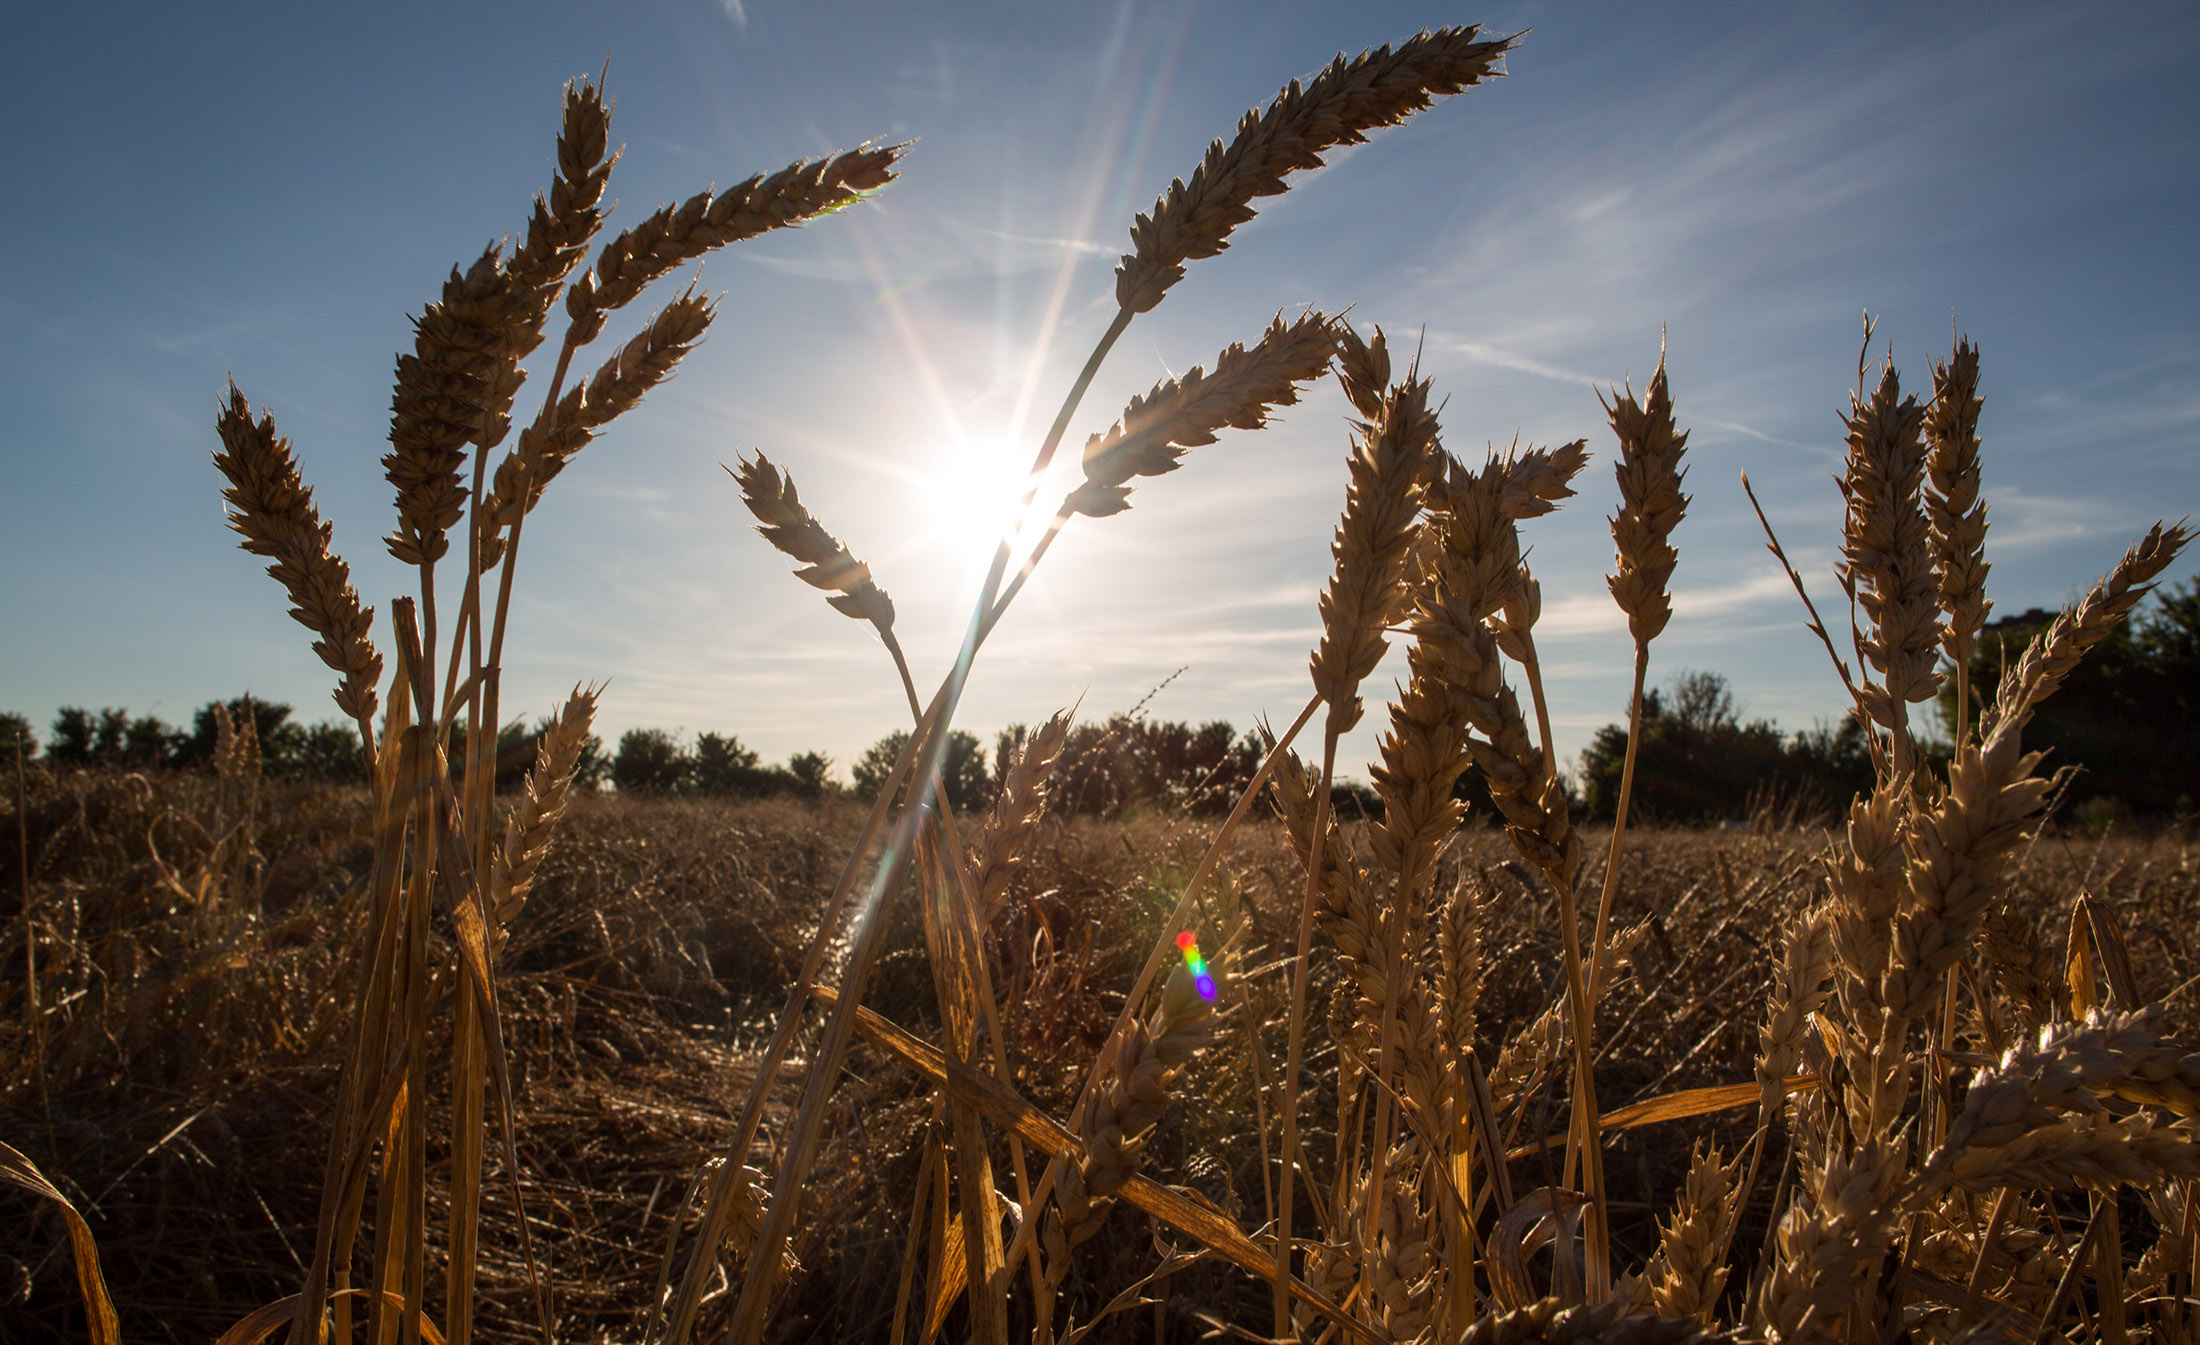 Crusoe wheat stands in a field before harvesting at Bentley Hall Farm in Wickford, U.K., on Monday, Aug. 15, 2016. U.K. wheat and barley exports are set to beat government forecasts for the season that ended in June as a weaker pound and higher corn prices make the country's overseas sales of the grains more competitive.
